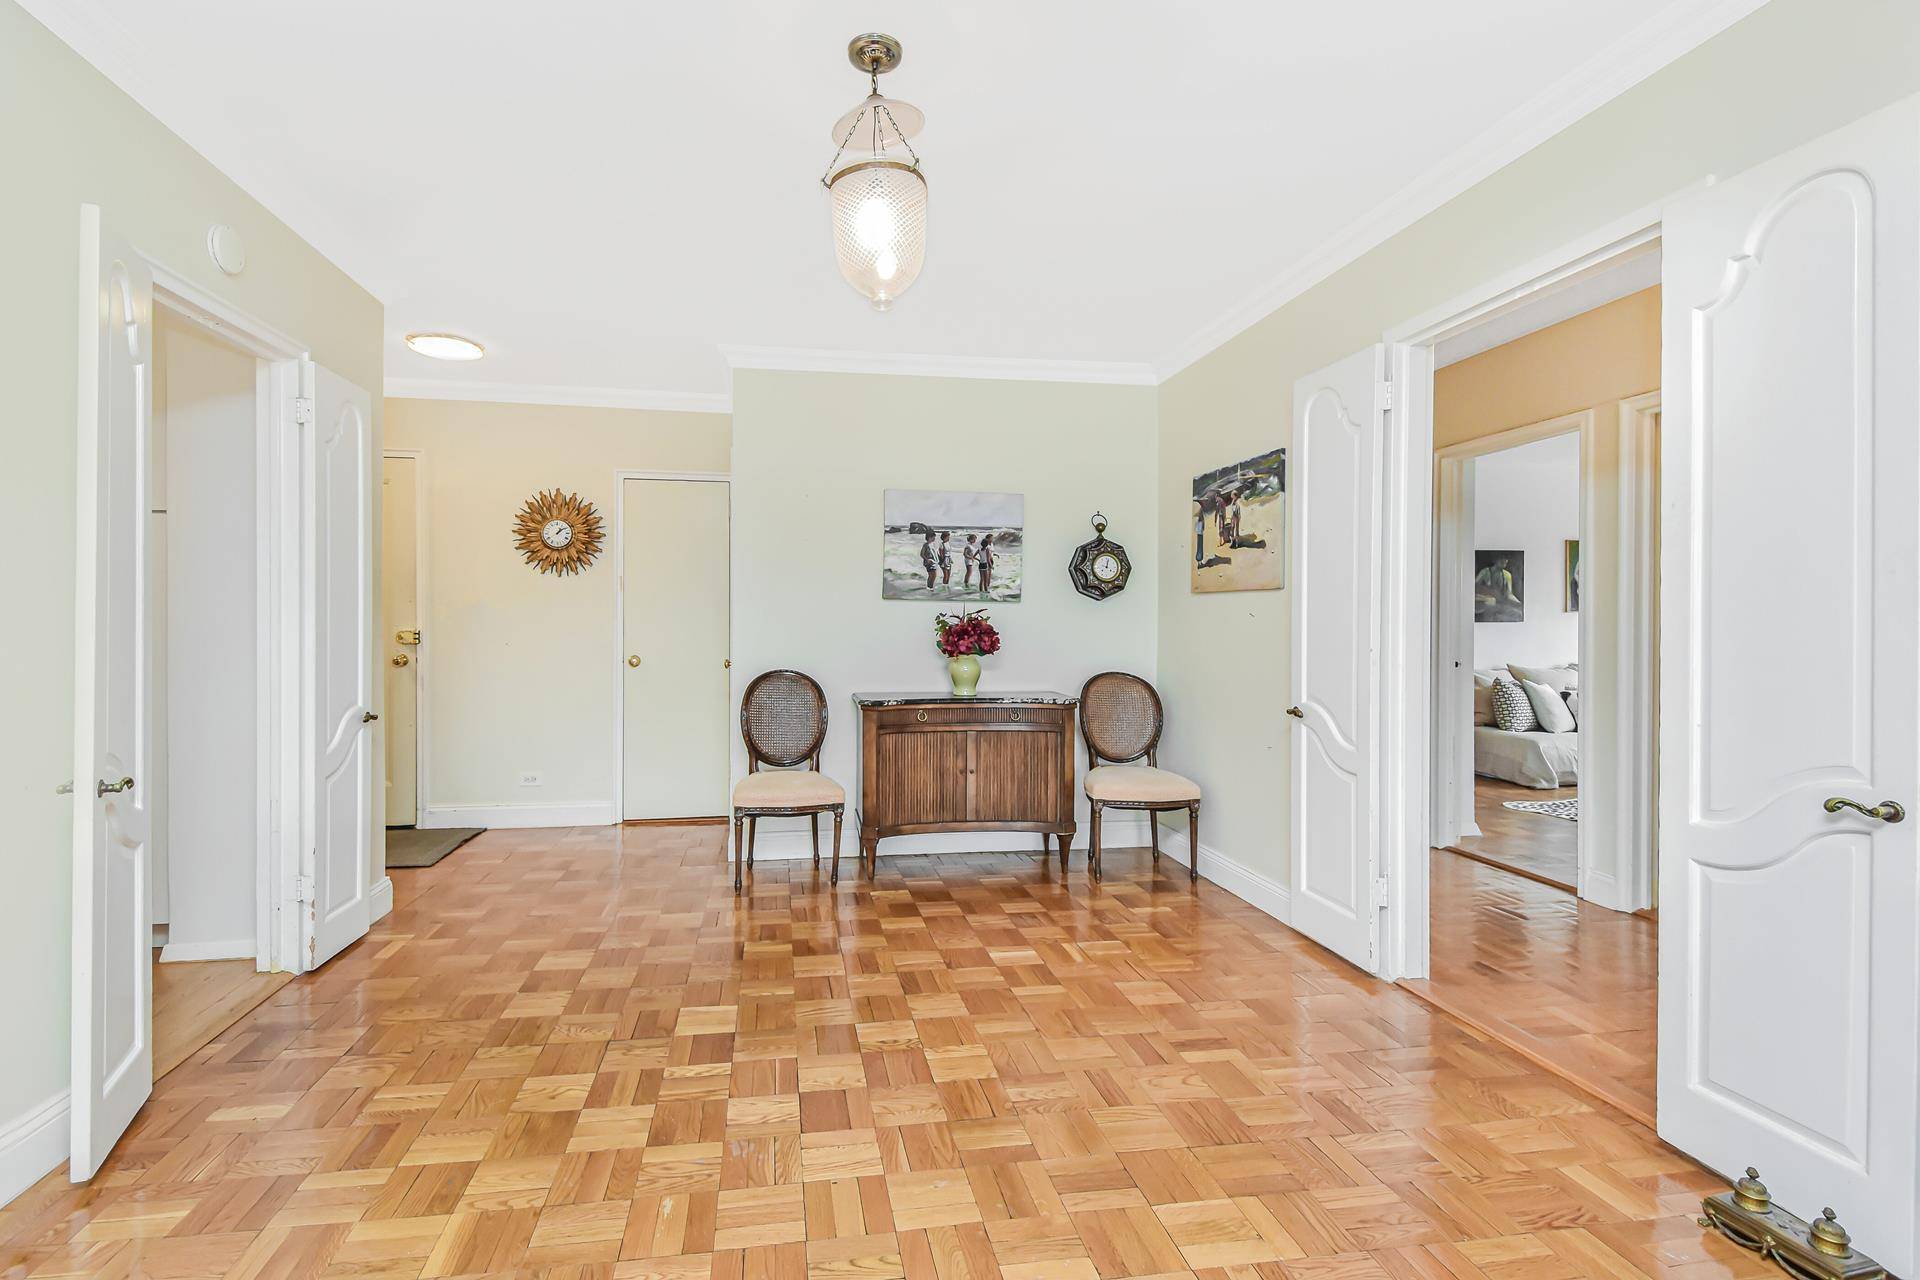 This is a rare opportunity to own a 2400 square foot apartment in serene Spuyten Duyvil area in south Riverdale.